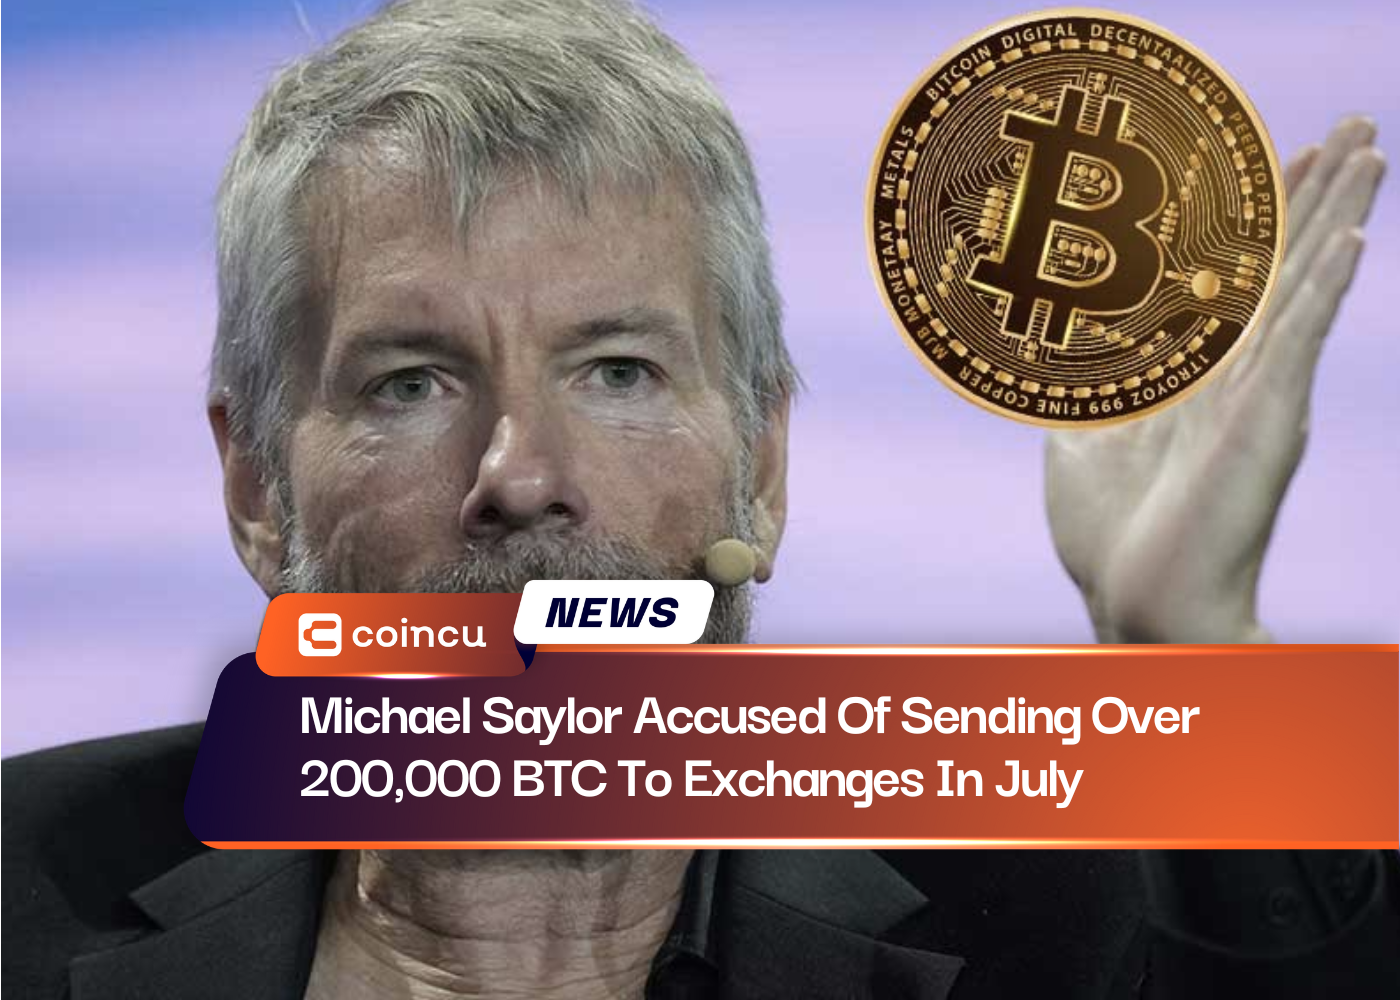 Michael Saylor Accused Of Sending Over 200,000 BTC To Exchanges In July